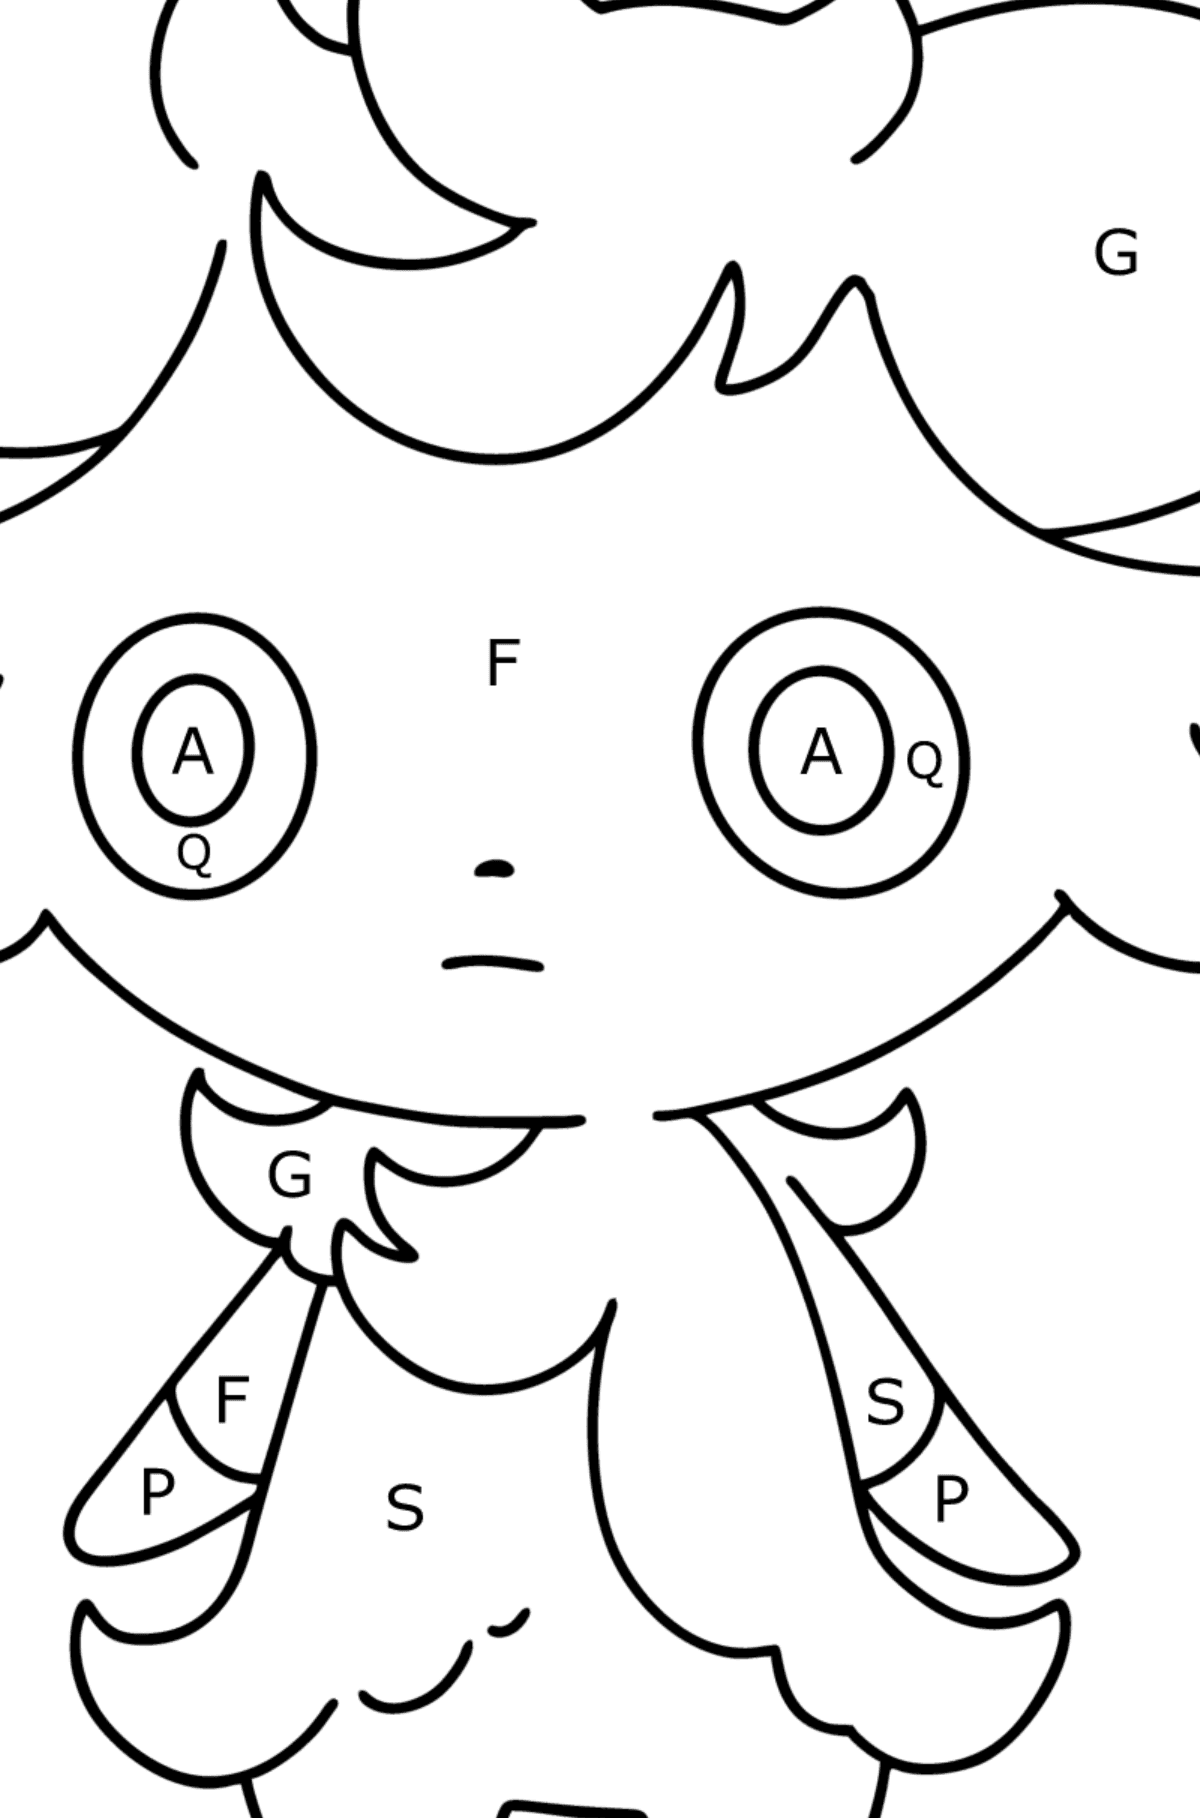 Pokemon Go Espurr coloring page - Coloring by Letters for Kids